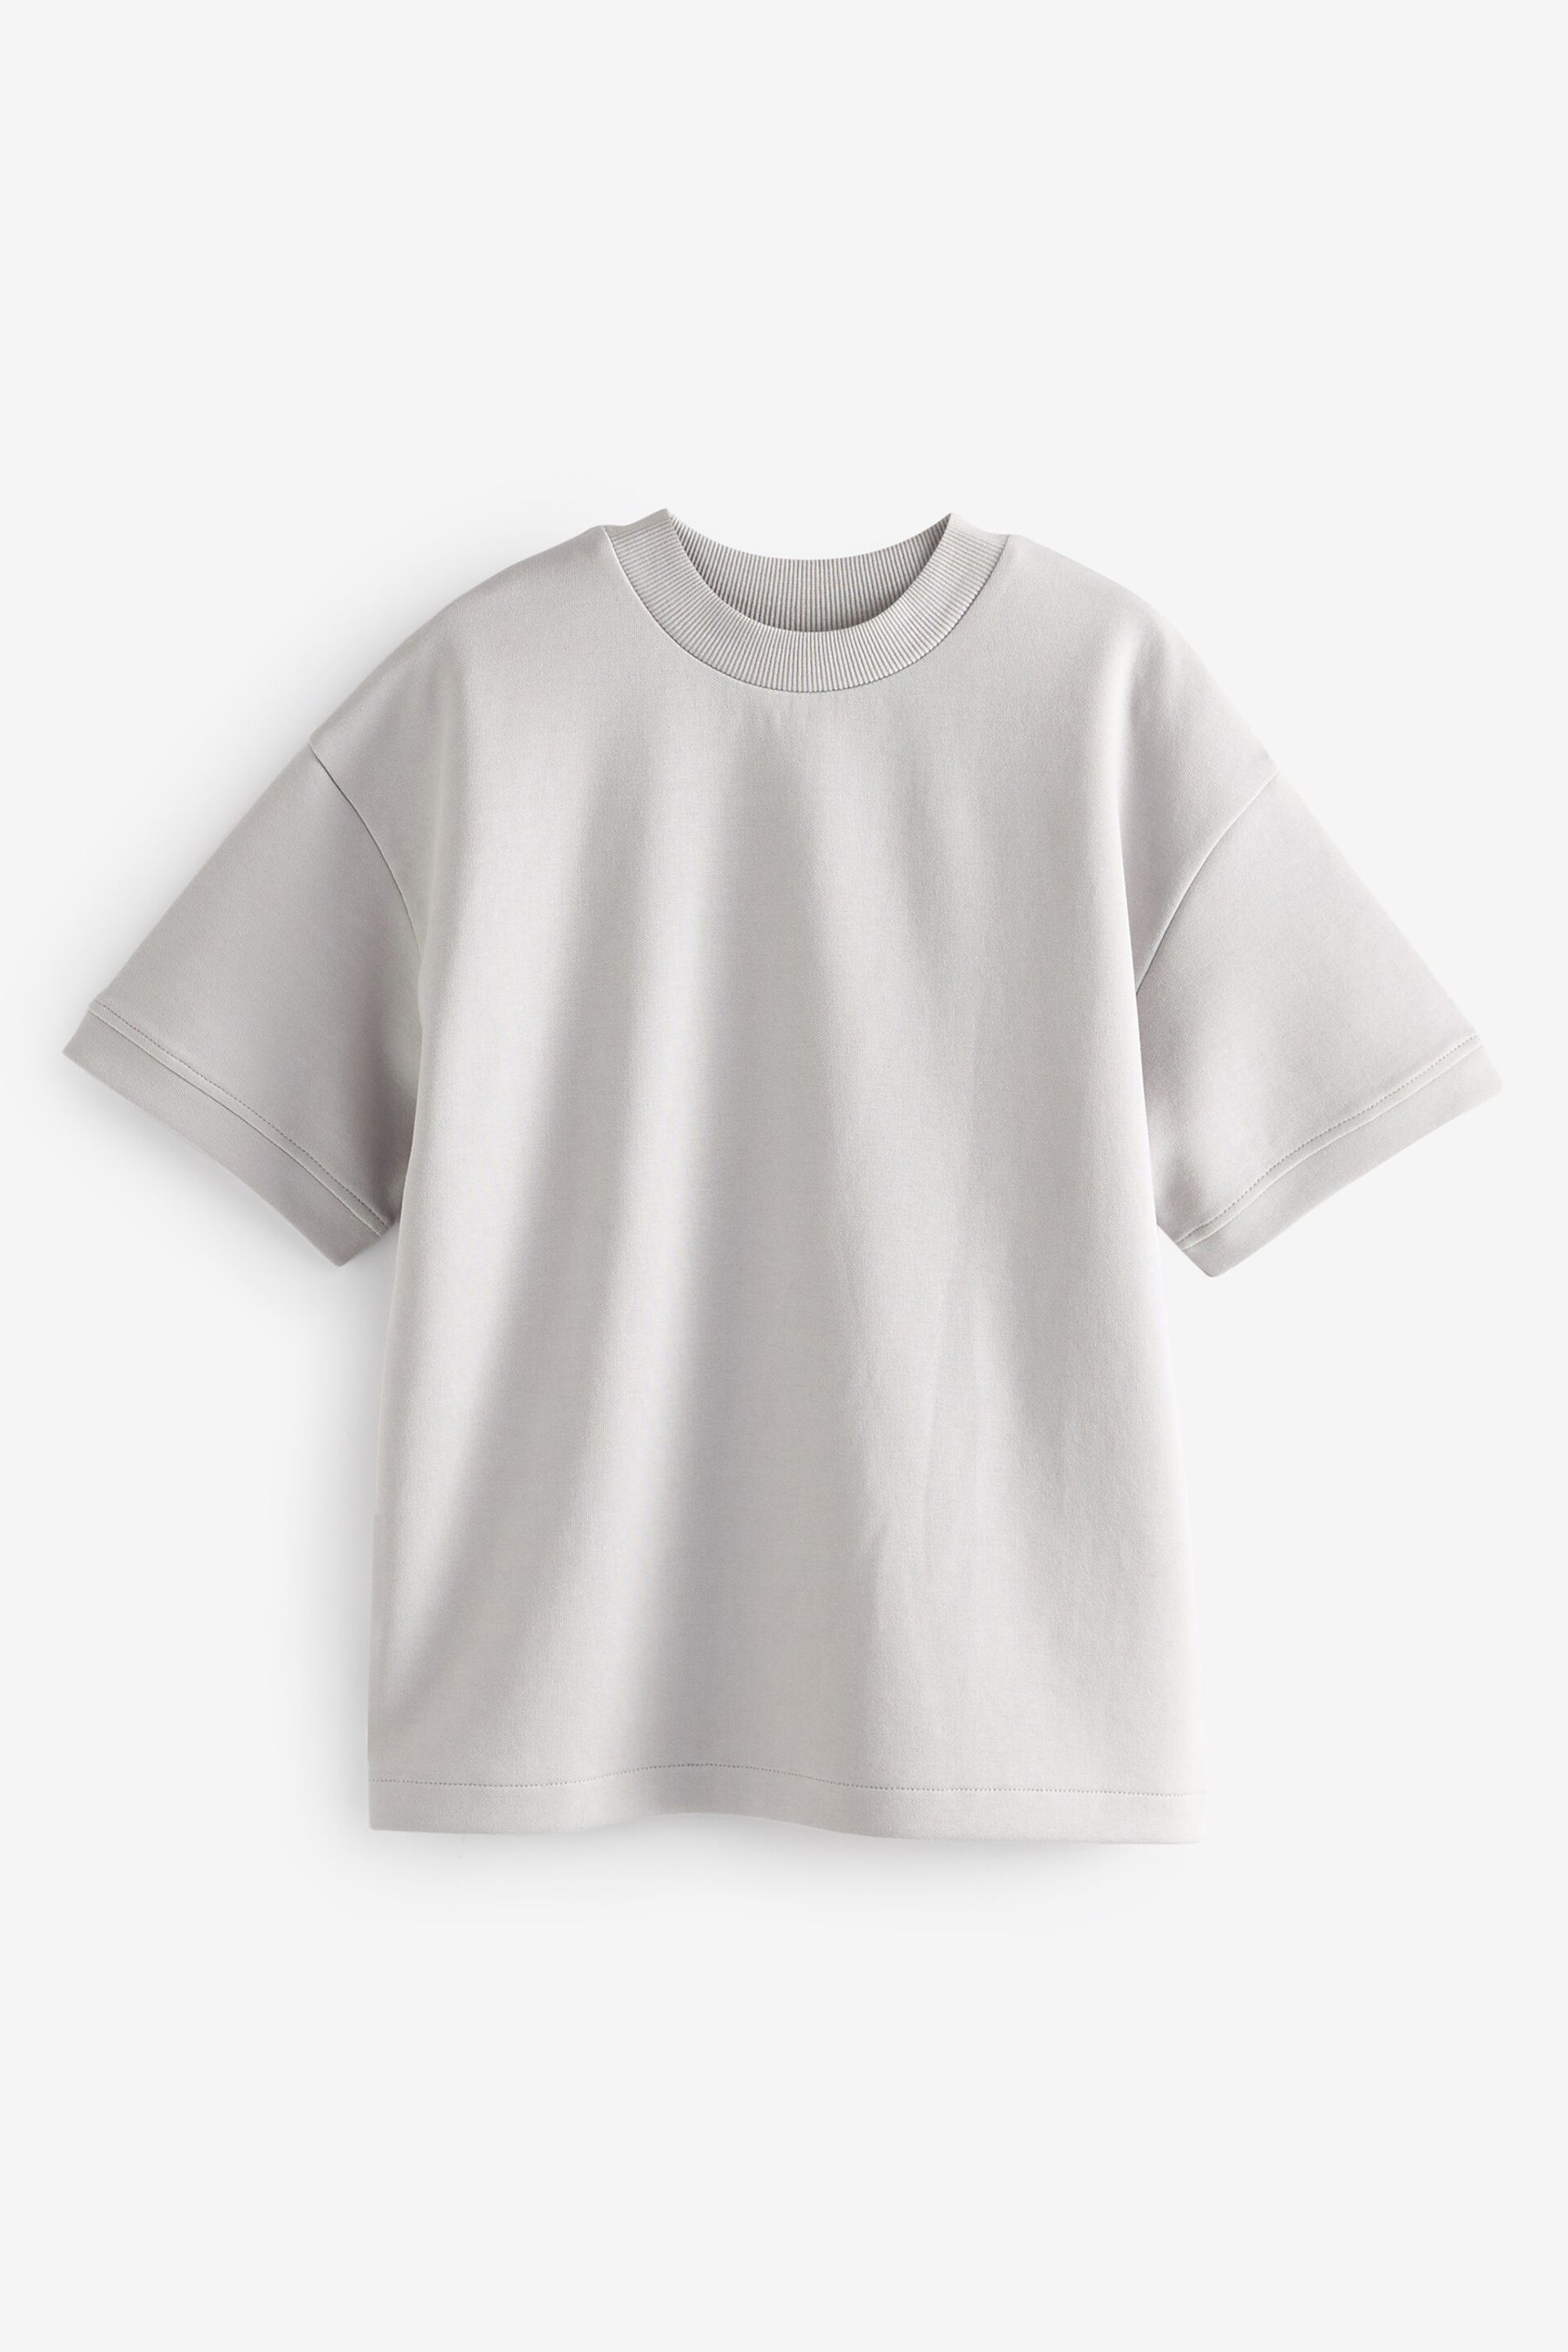 Grey Relaxed Fit Heavyweight T-Shirt (3-16yrs) - Image 1 of 3